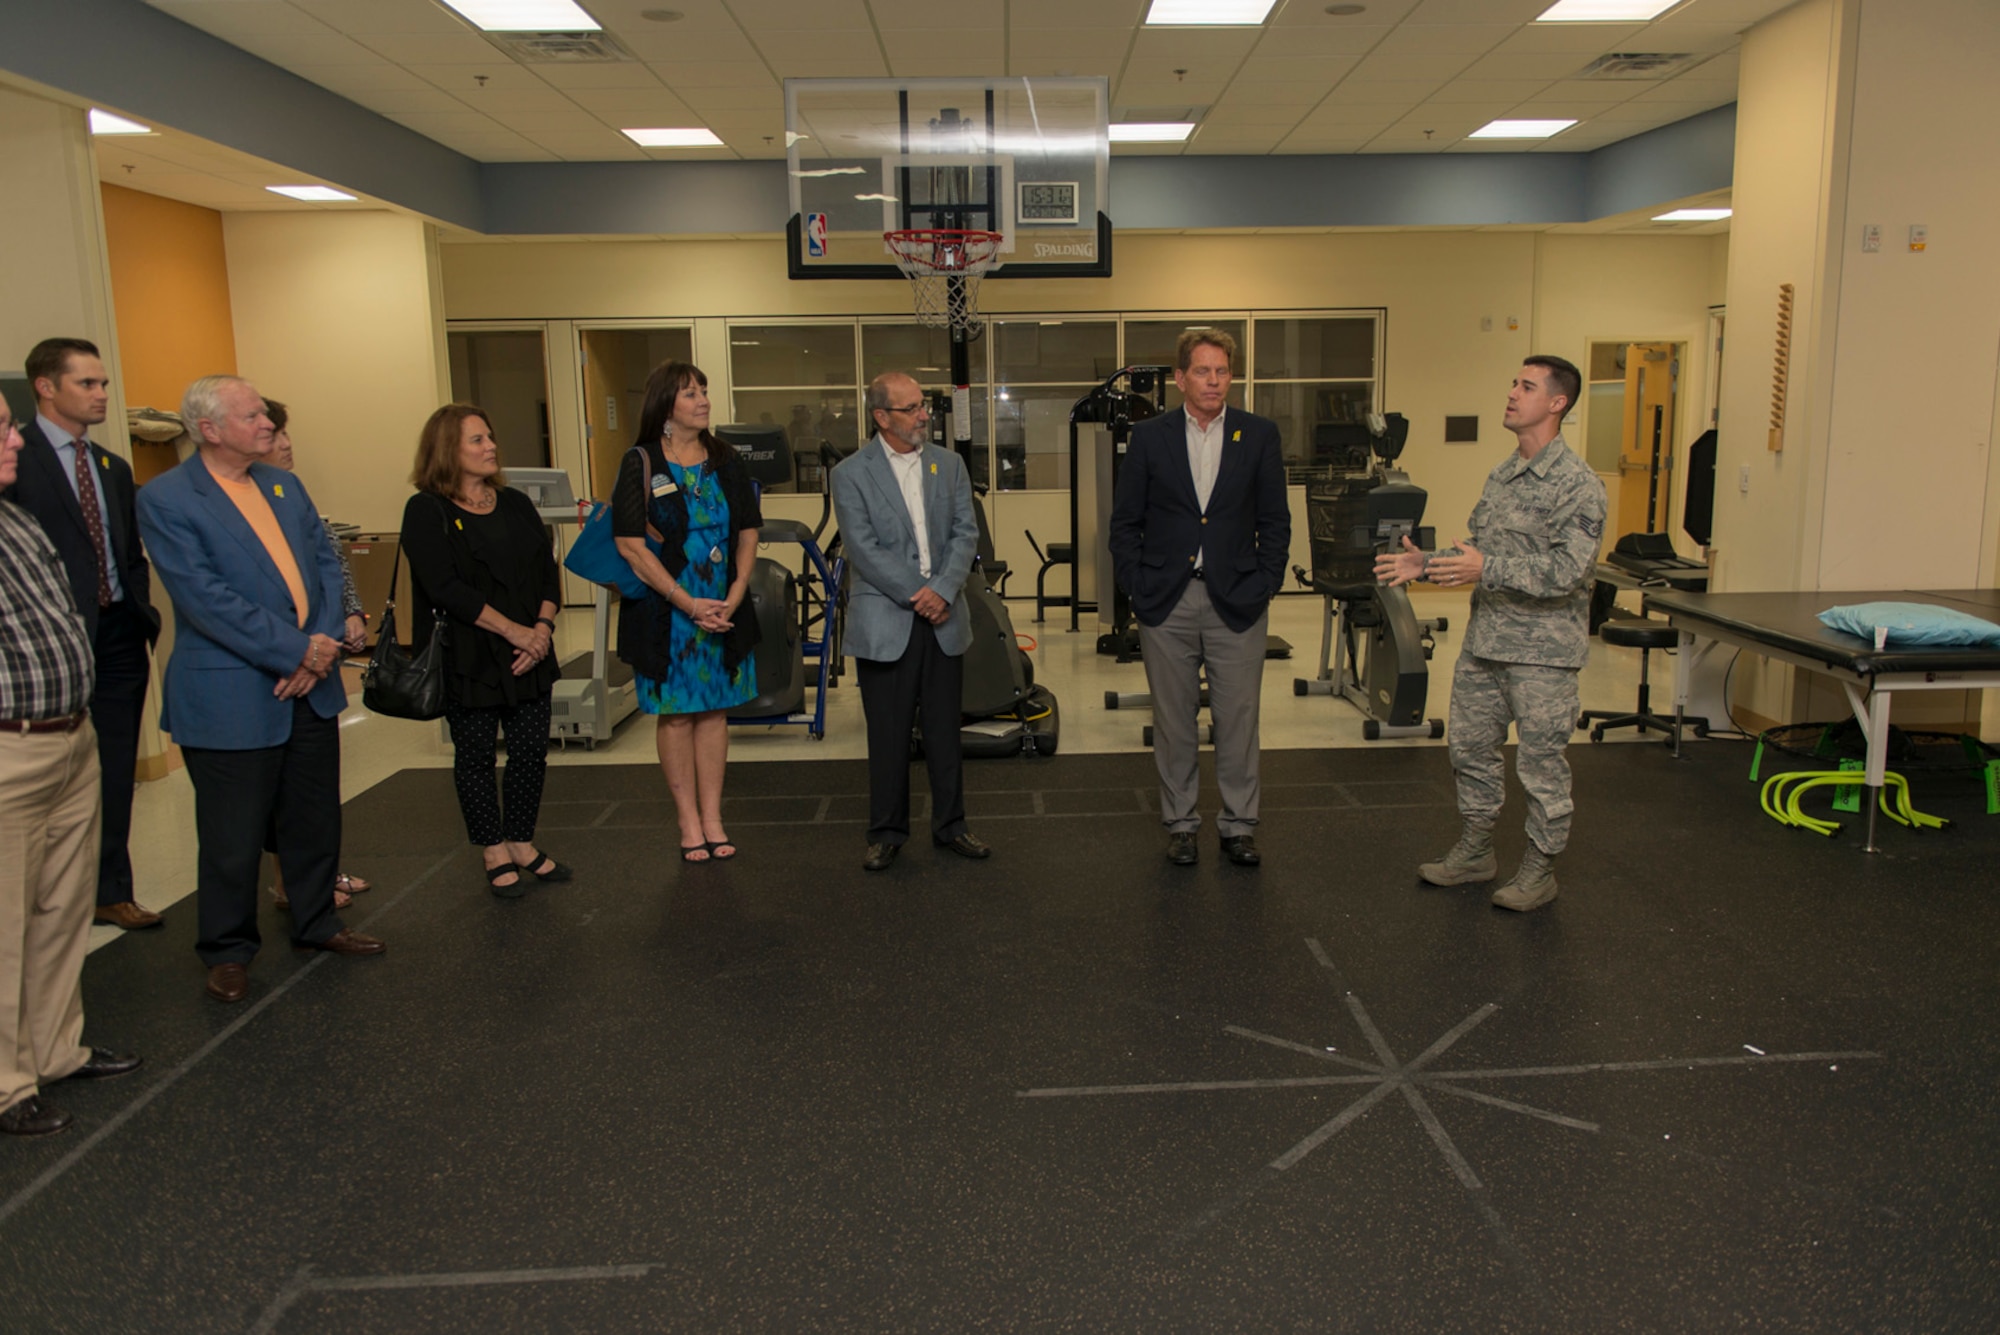 Staff Sgt. Wesley McCool, 81st Surgical Operations Squadron physical medicine technician, briefs 81st Training Wing leadership and honorary commanders about the importance of injury prevention and physical therapy at the Keesler Medical Center Sept. 29, 2016, on Keesler Air Force Base, Miss. The honorary commanders, who are local civilian civic and business leaders, toured the physical therapy clinic, emergency room and intensive care unit to learn more about the capabilities and mission of the 81st MDG. (U.S. Air Force photo by Andre’ Askew/Released)